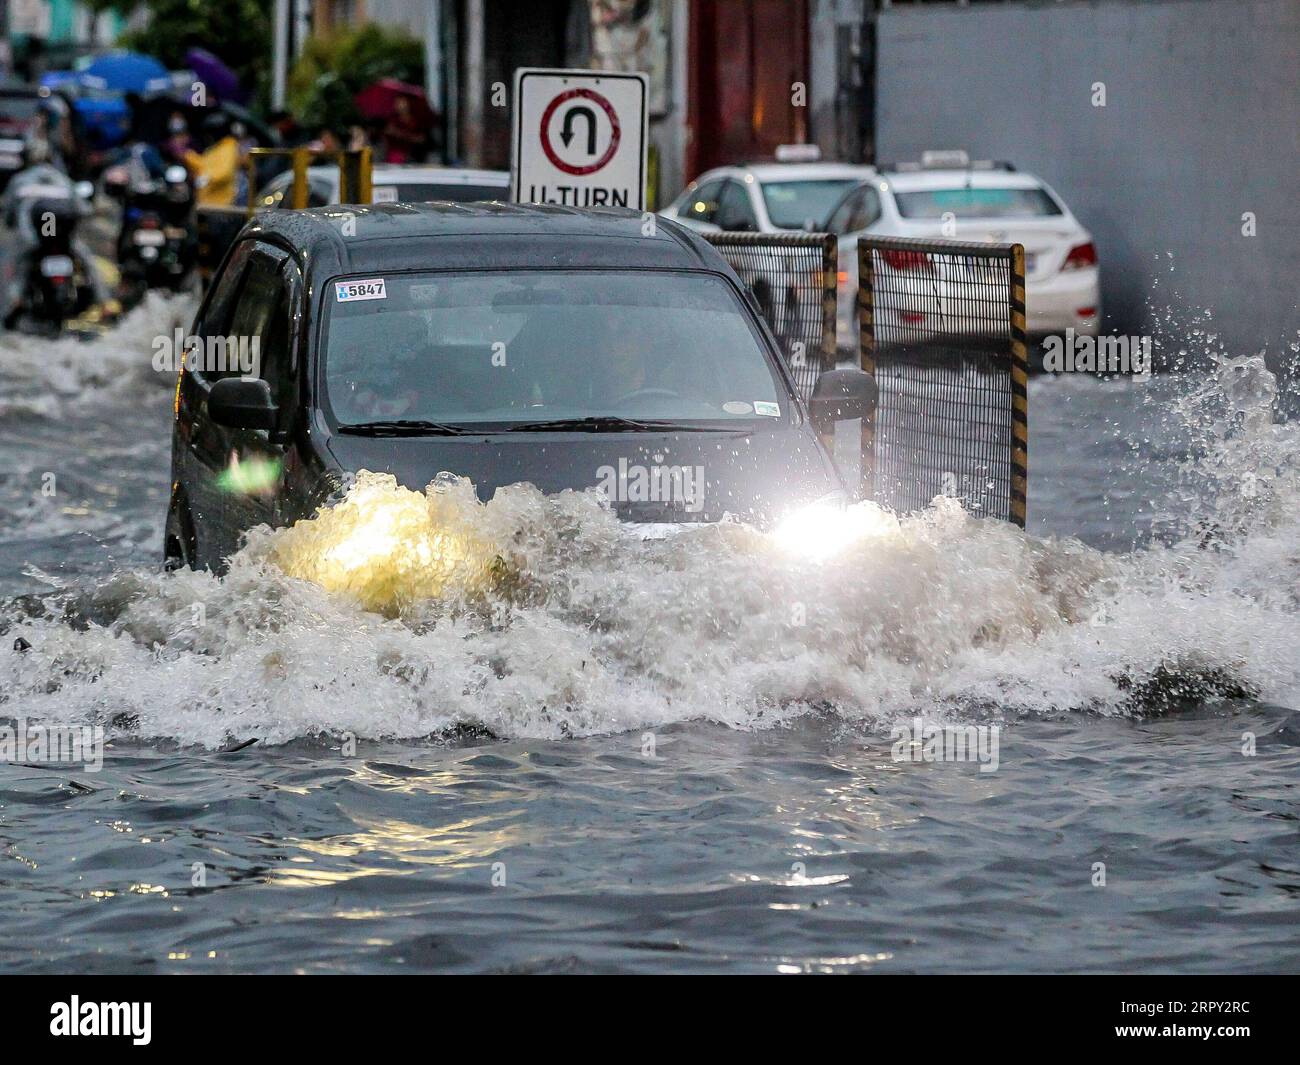 200611 -- MANILA, June 11, 2020 -- A car drives through a flooded area caused by the heavy rain from the tropical depression locally named Butchoy in Manila, the Philippines, on June 11, 2020.  PHILIPPINES-MANILA-TROPICAL DEPRESSION BUTCHOY ROUELLExUMALI PUBLICATIONxNOTxINxCHN Stock Photo